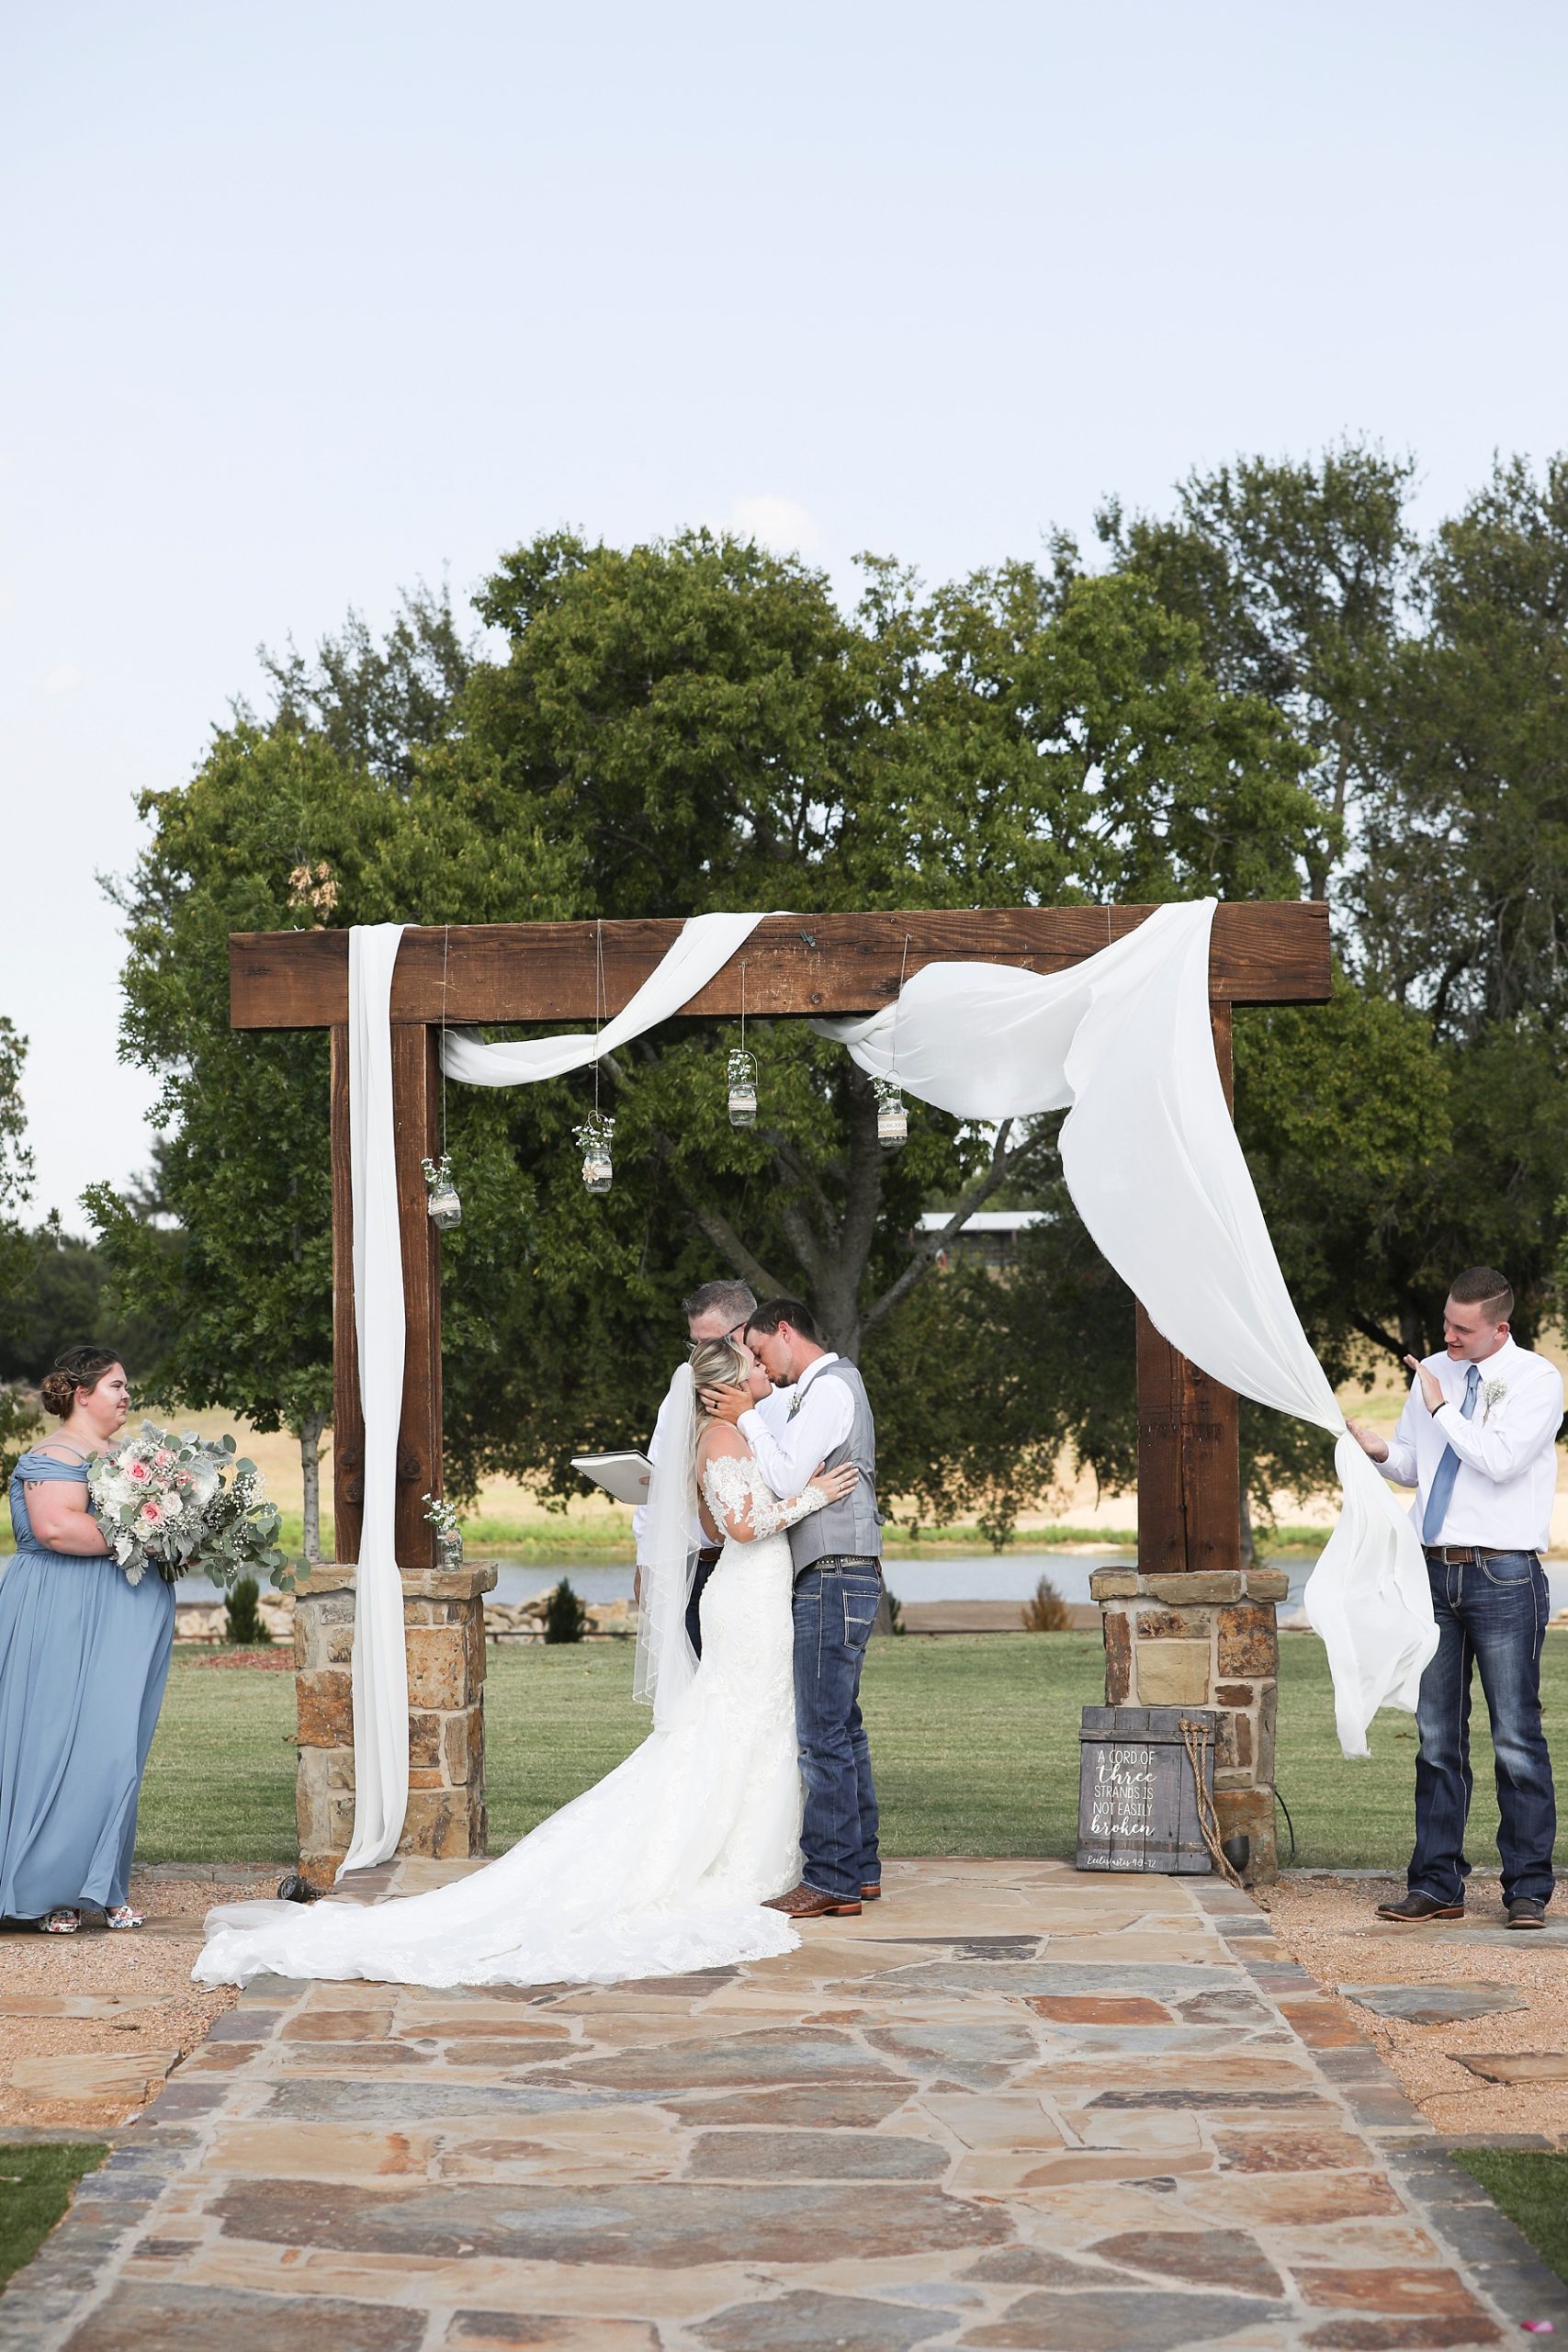 Texas wedding ceremony under wooden arbor photographed by Randi Michelle Weddings